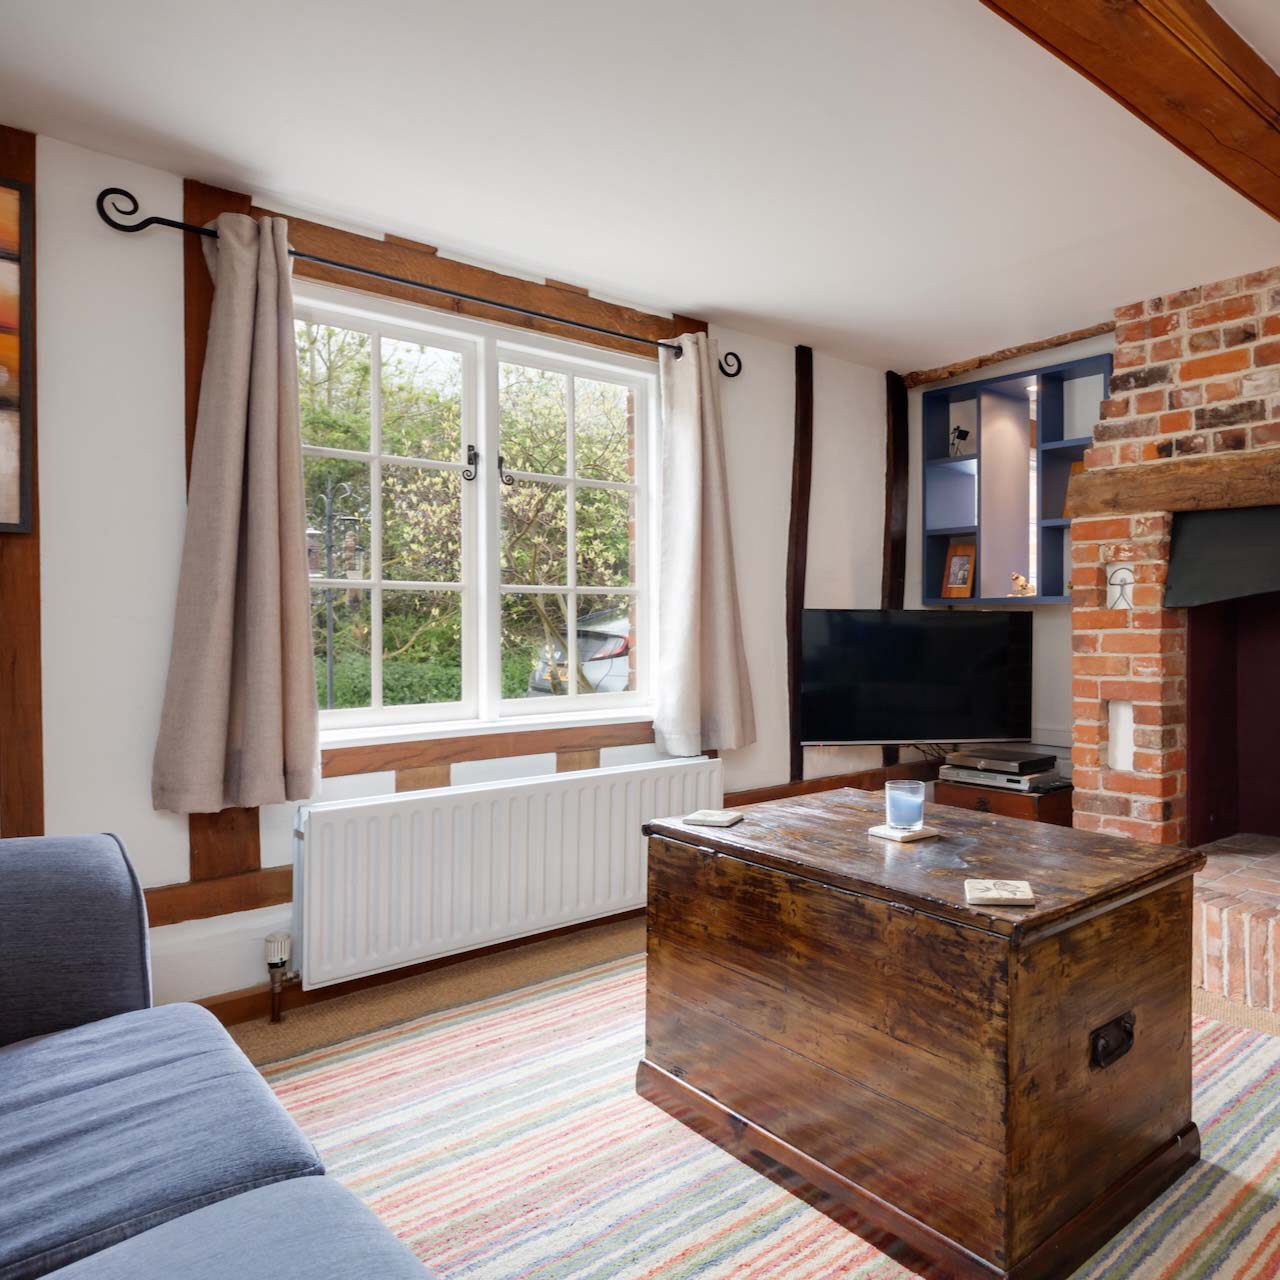 Clare, Suffolk - 27 April 2018: Beautiful charming small traditional cottage living room with inglenook style fireplace and chimney breast with exposed brickwork and cast iron wood burning stove